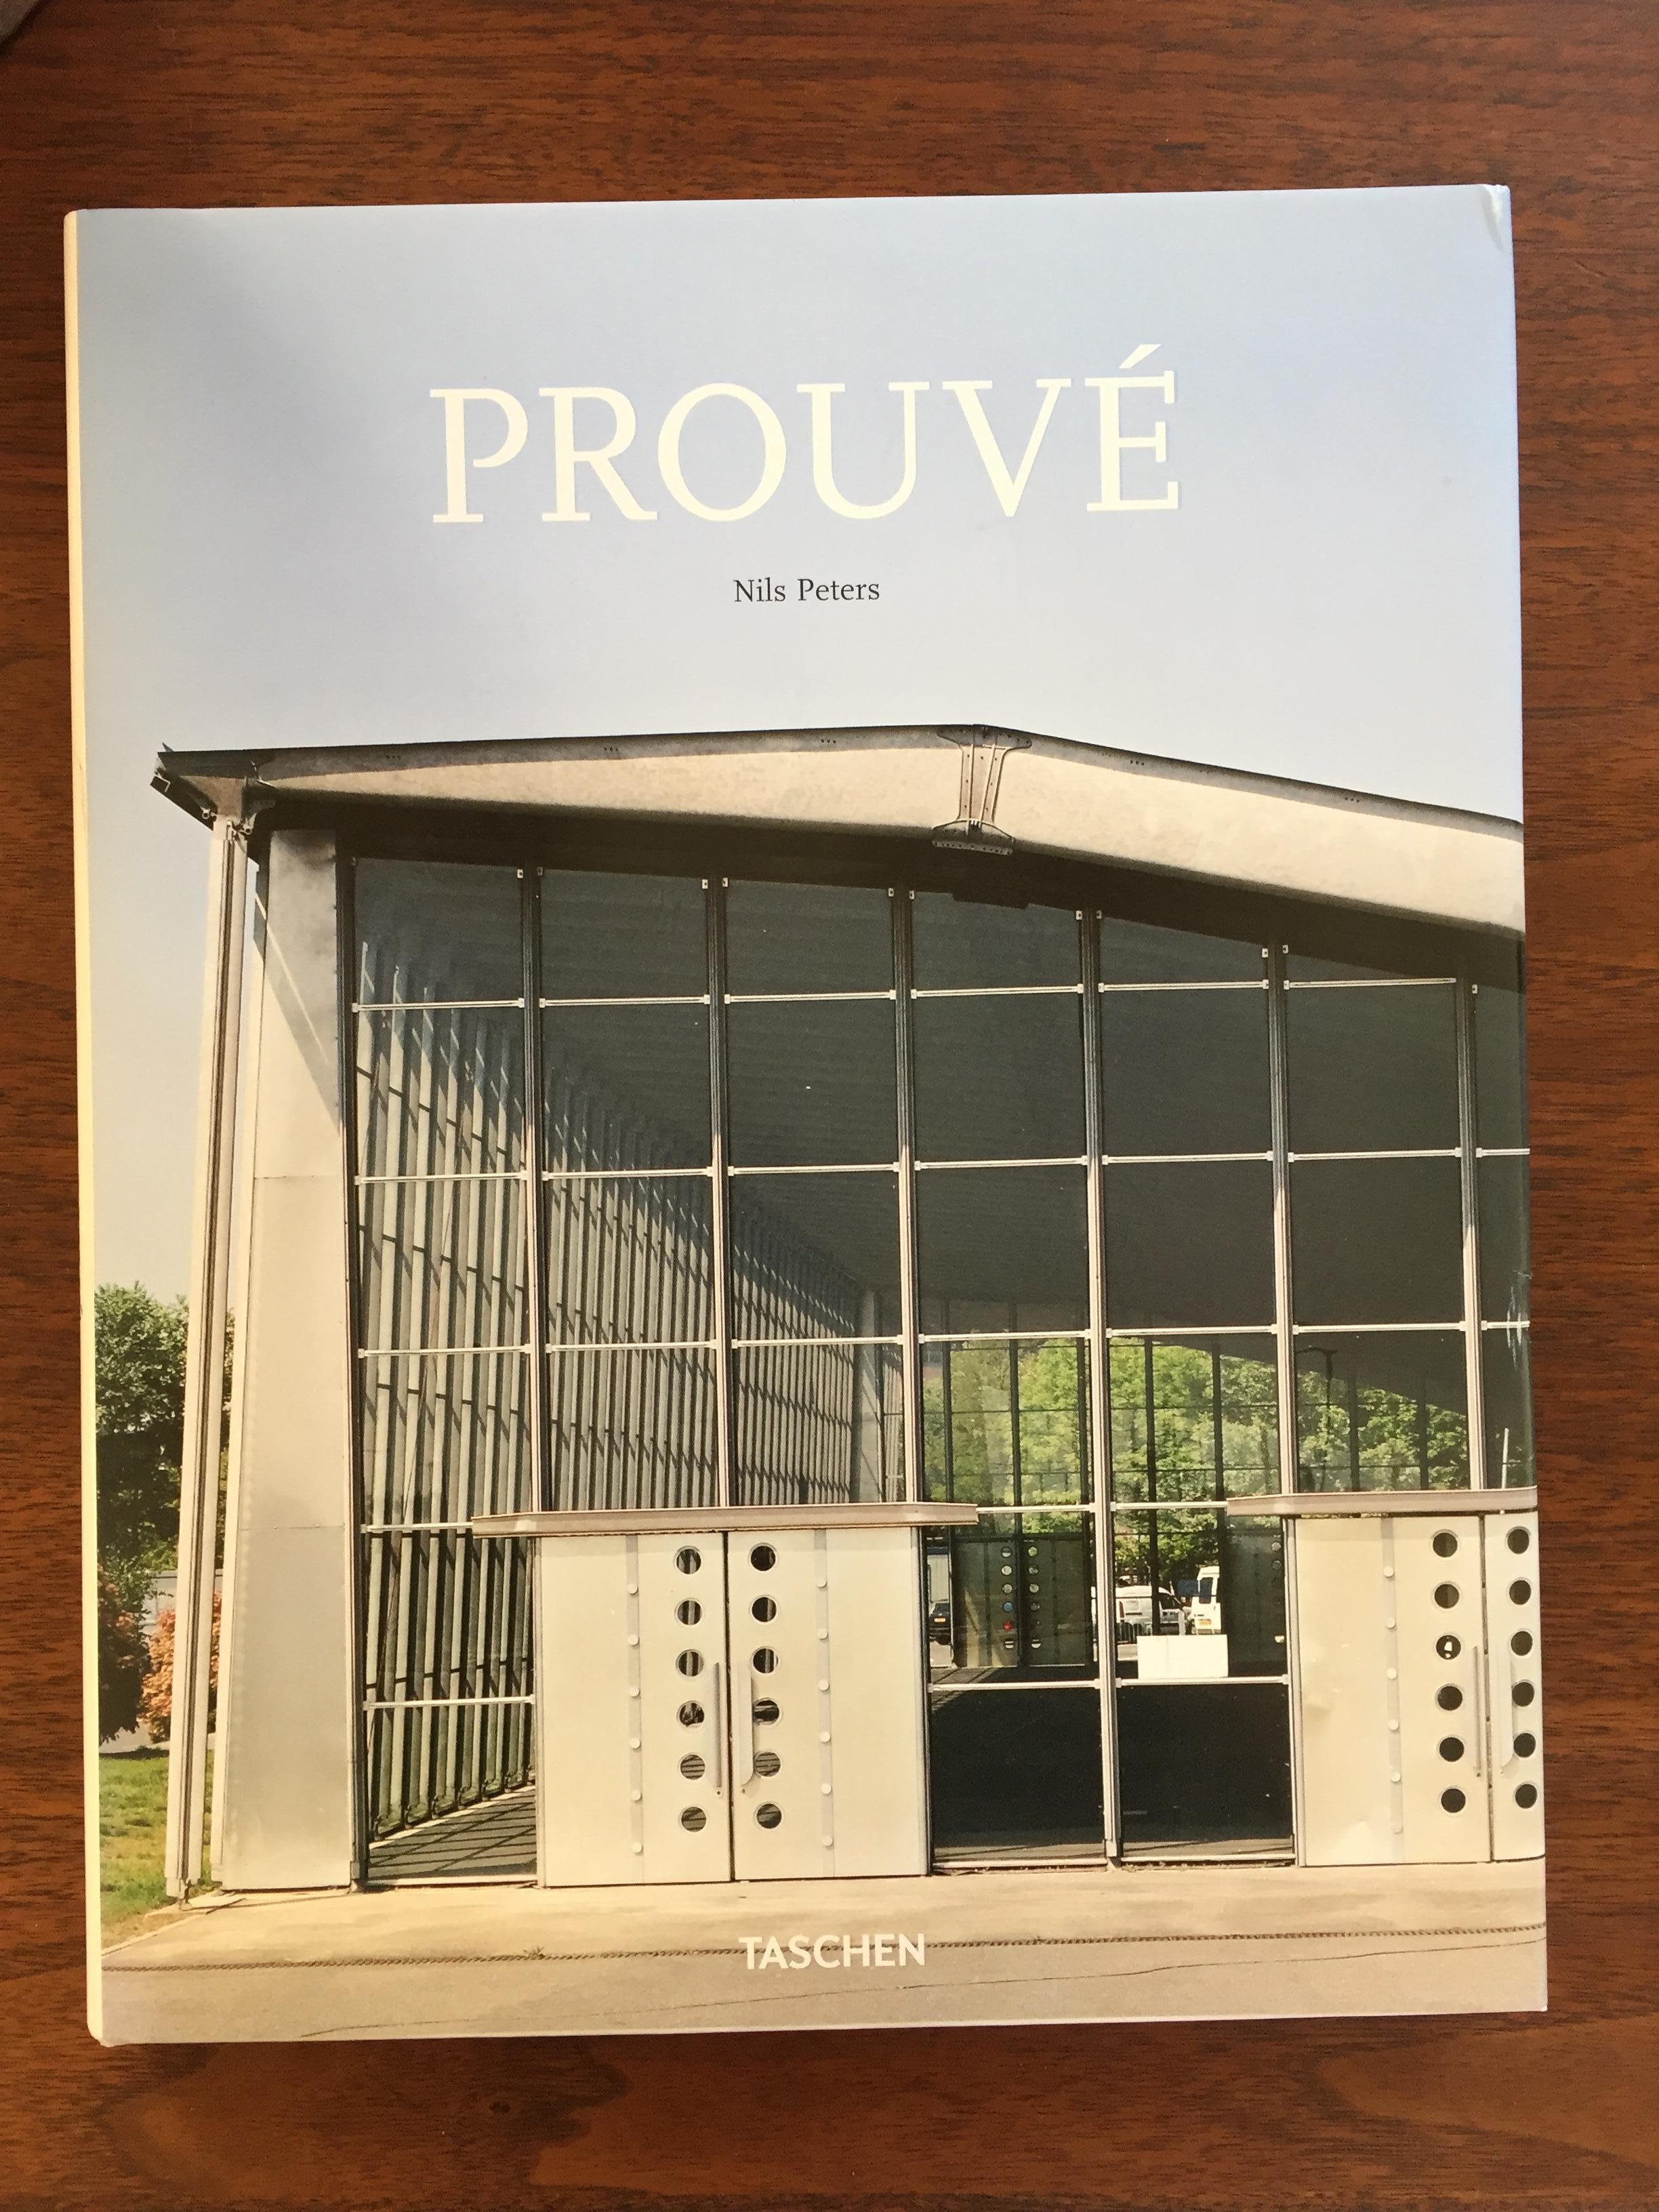 PROUVÉ Taschen book, 96 pages by Nils Peters. 
Celebrate the man, the myth, the legendary artistic blacksmith, designer and manufacturer.
French architect and designer Jean Prouvé innovated crisp, economical construction designs, marrying